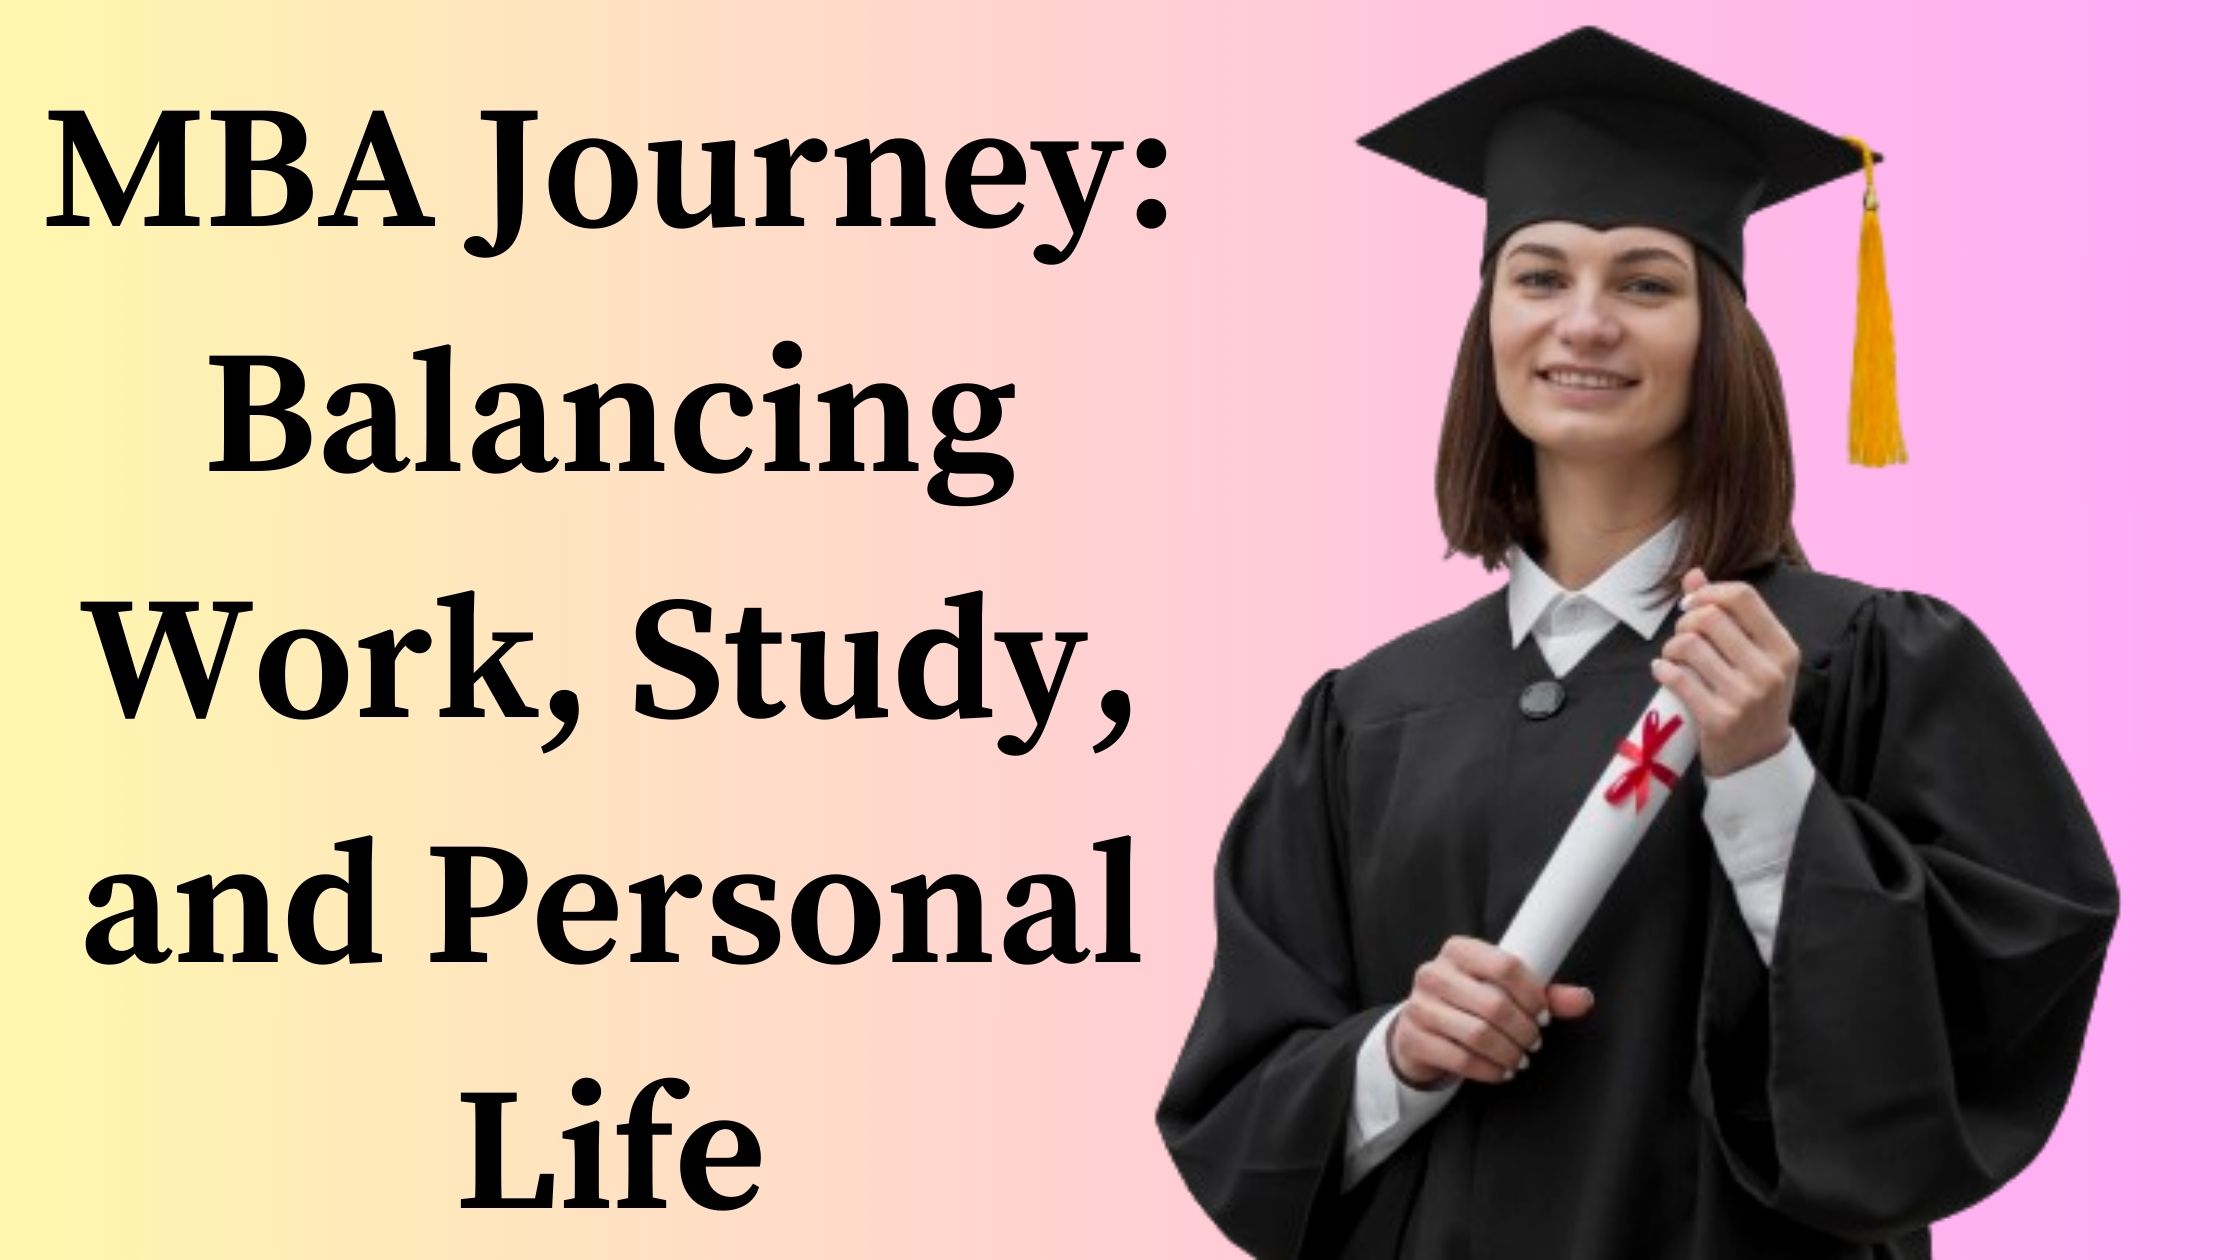 MBA Journey: Balancing Work, Study, and Personal Life